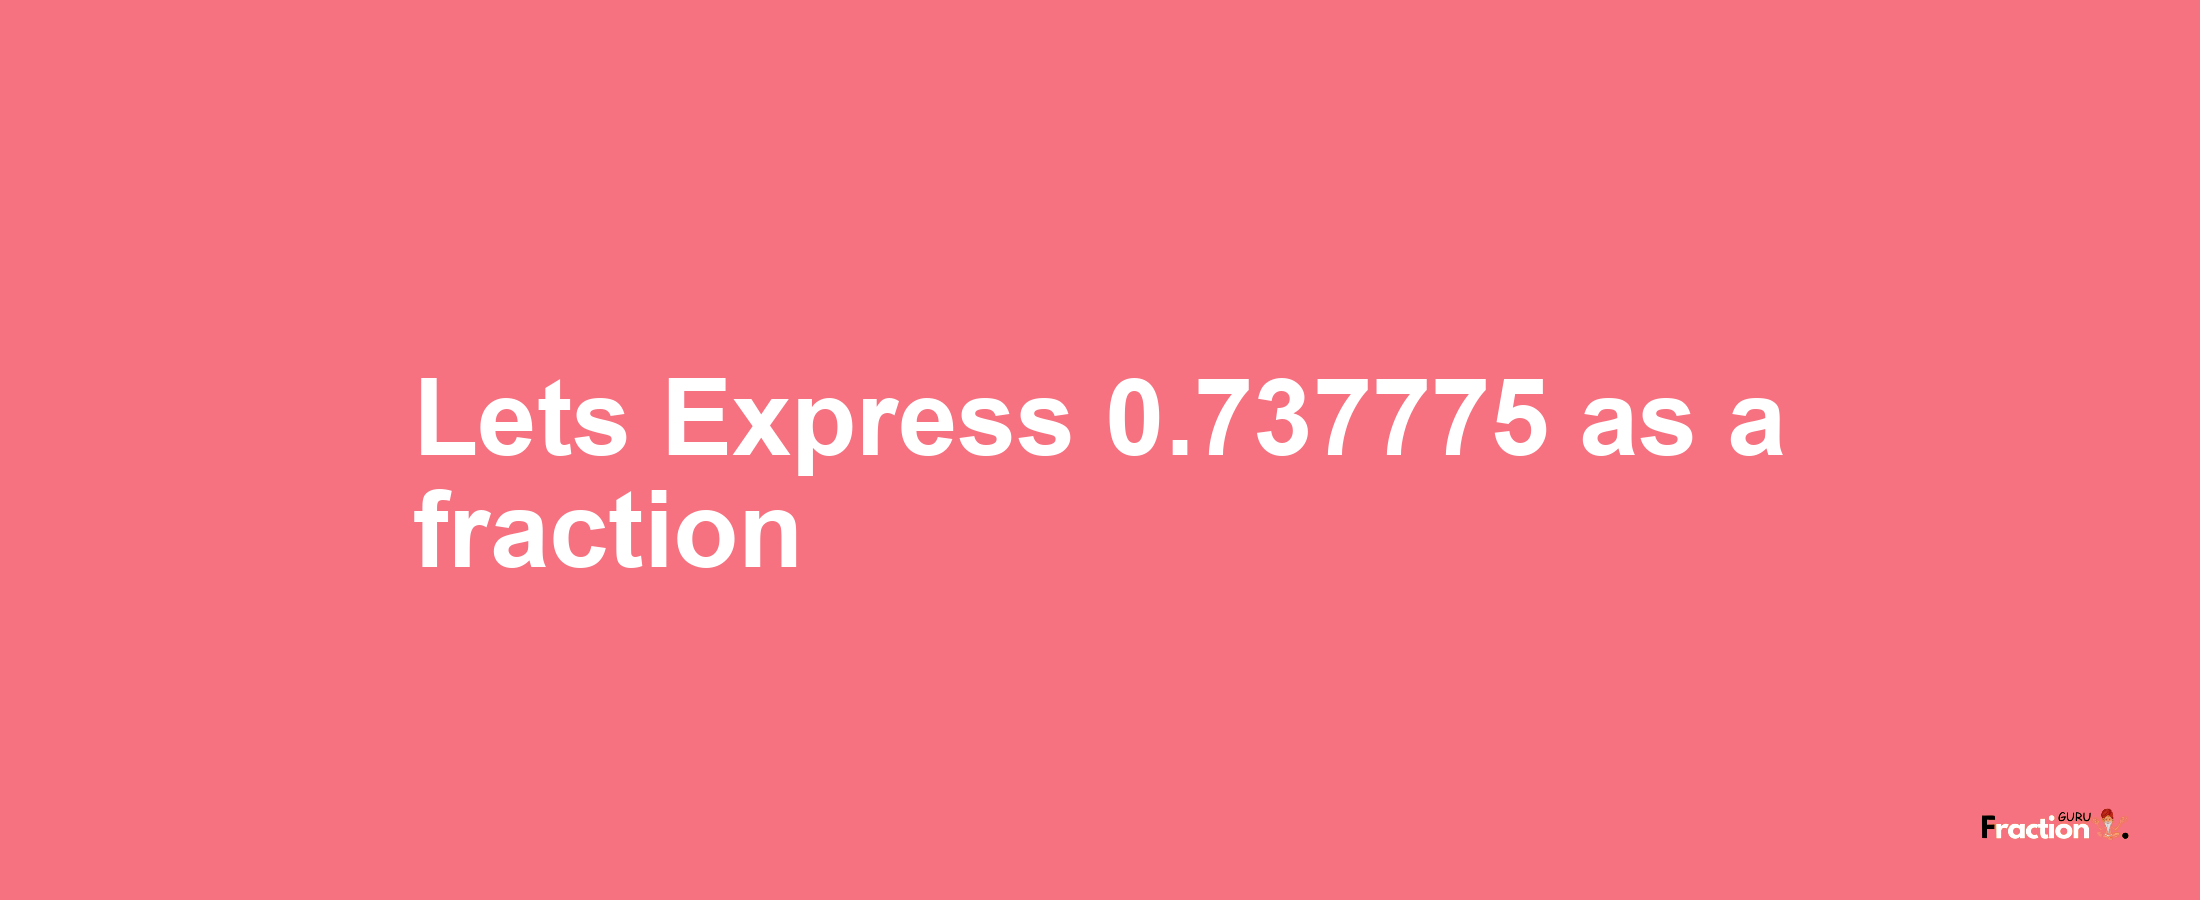 Lets Express 0.737775 as afraction